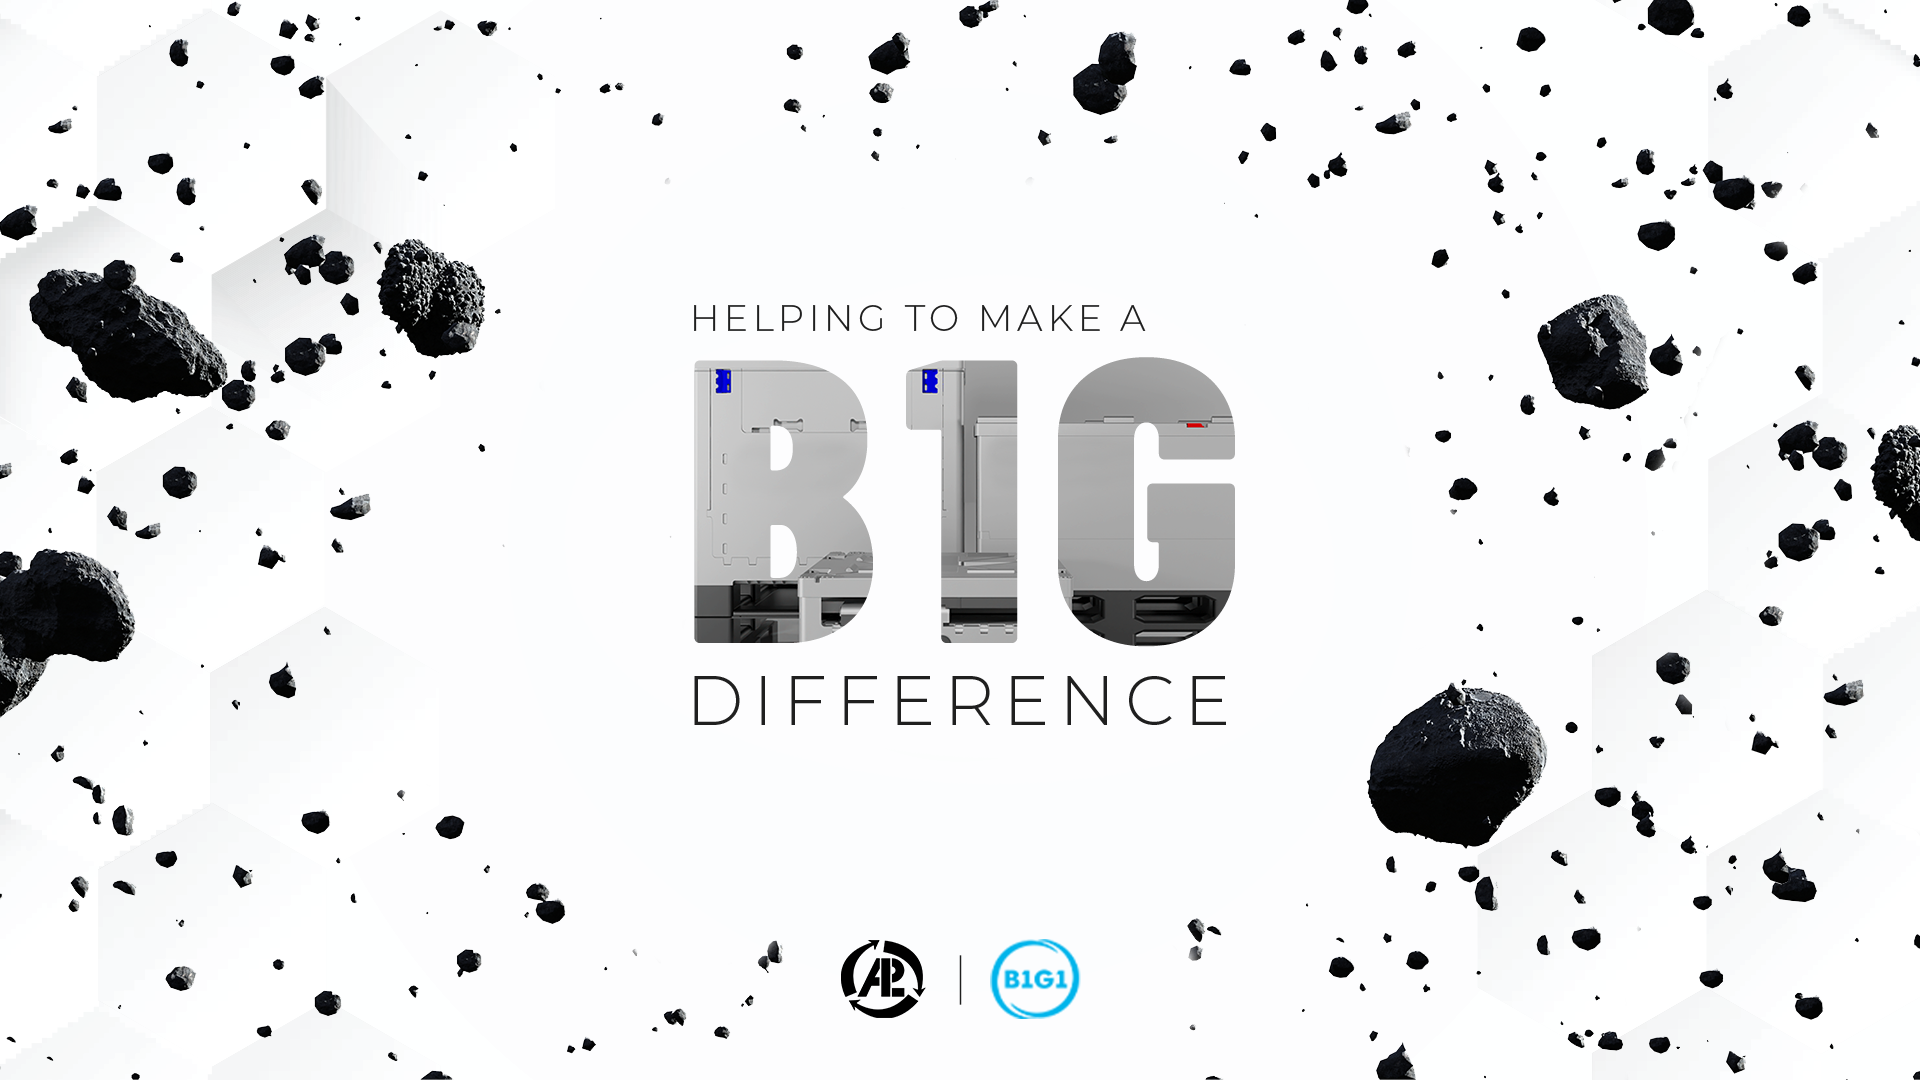 B1G1 - How Your ALLpaQ Purchase Can Make a B1G Difference